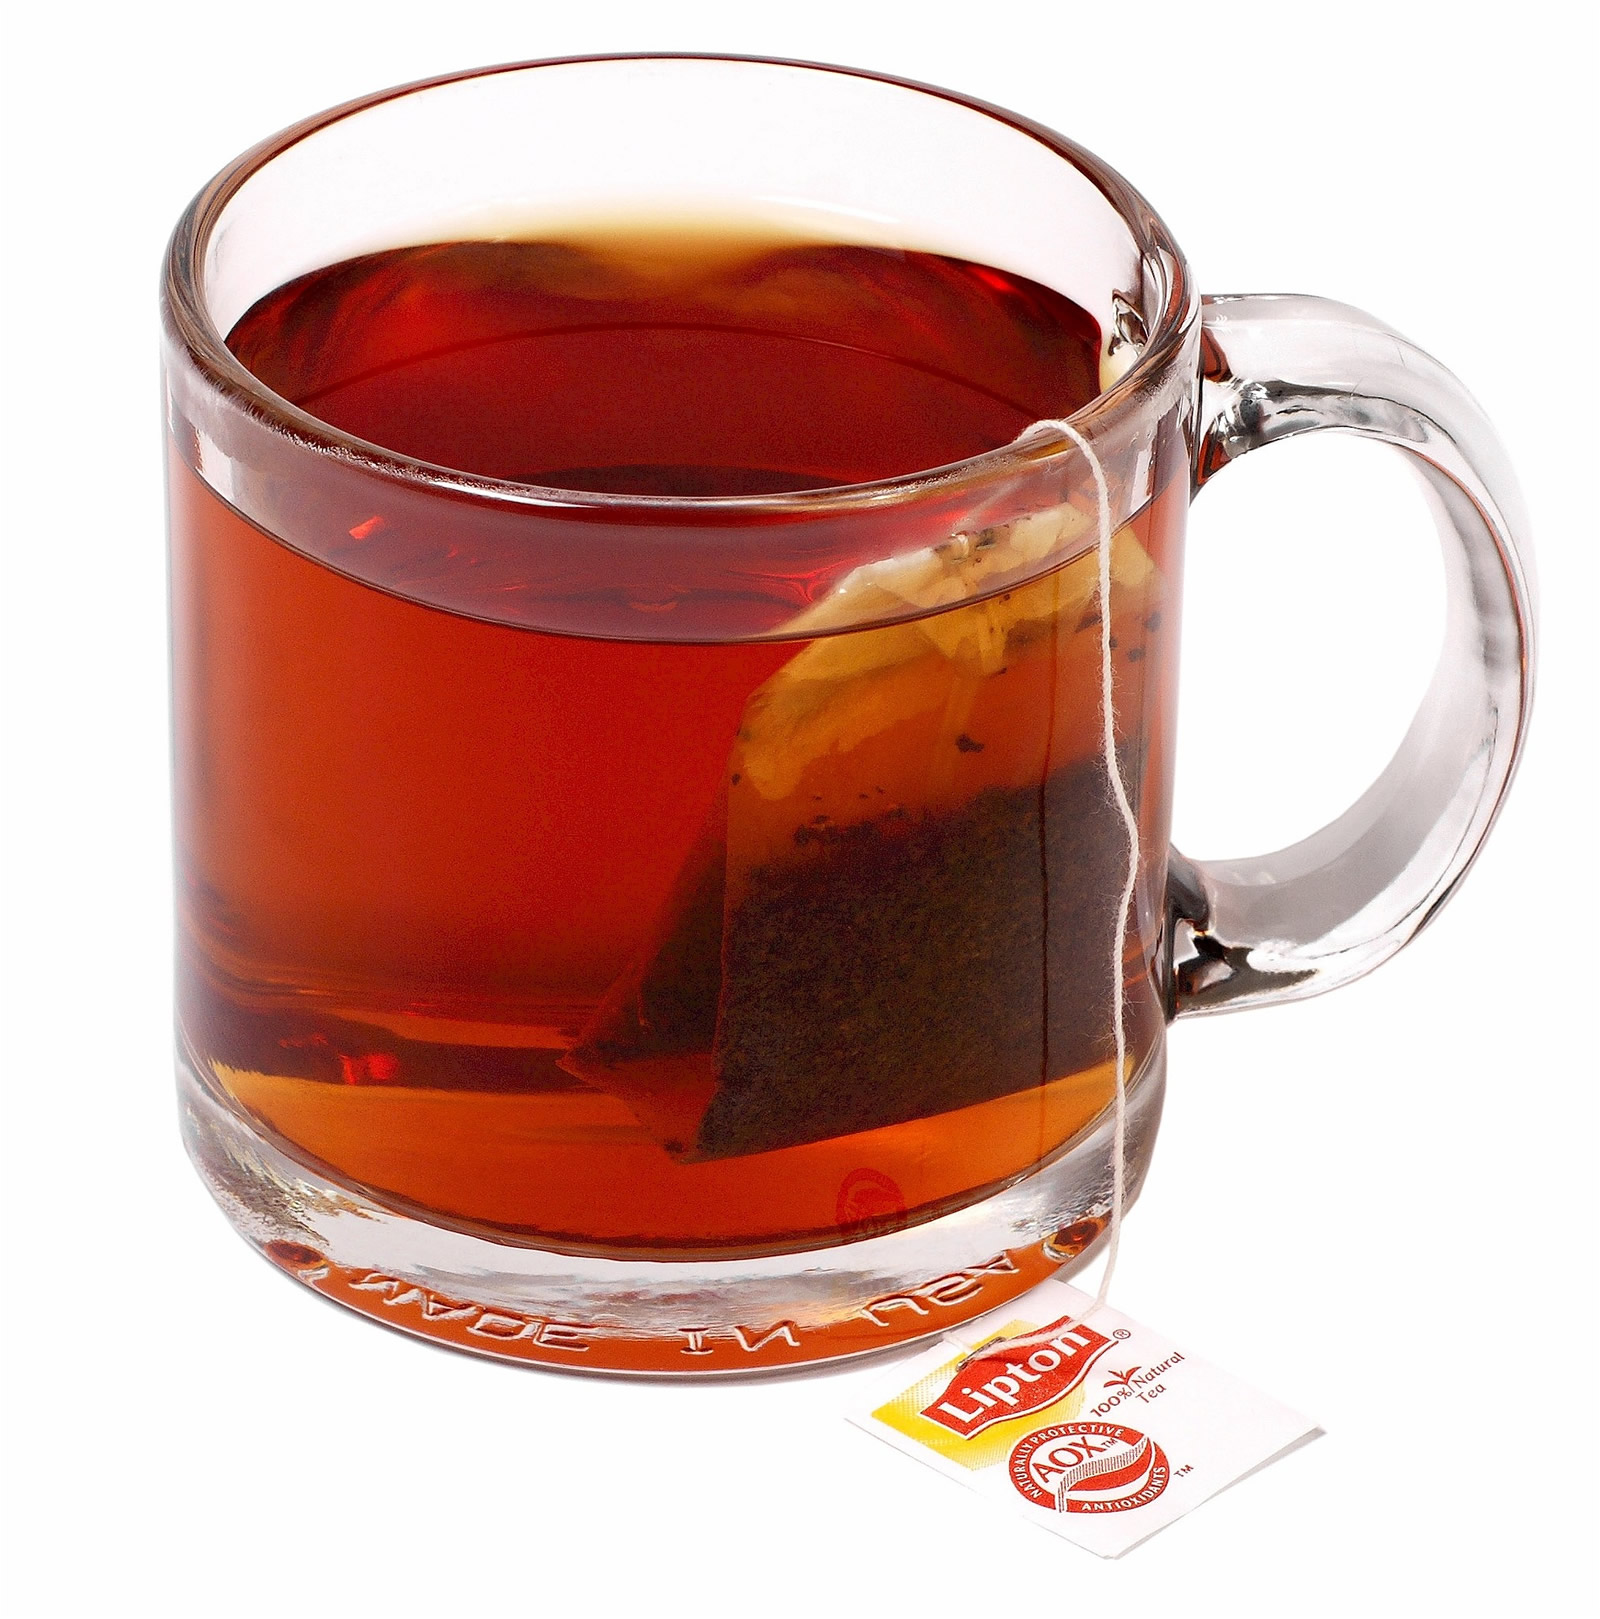 plastic-teabags-release-microscopic-particles-into-tea-reallygood